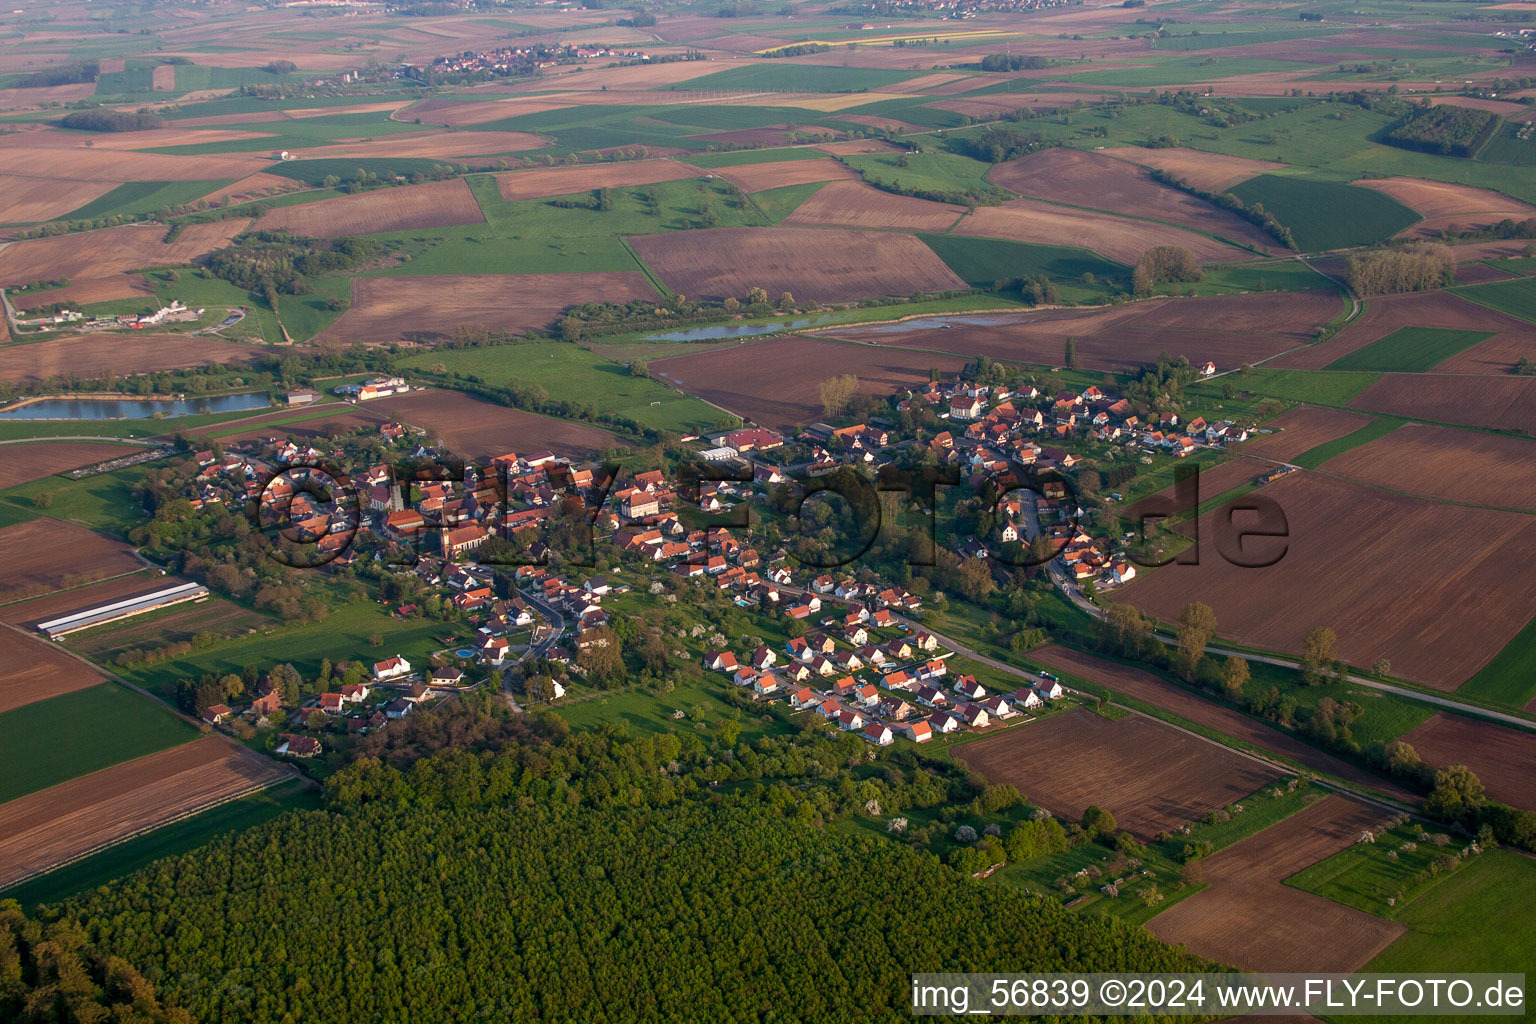 Aerial view of Village - view on the edge of agricultural fields and farmland in Kutzenhausen in Grand Est, France